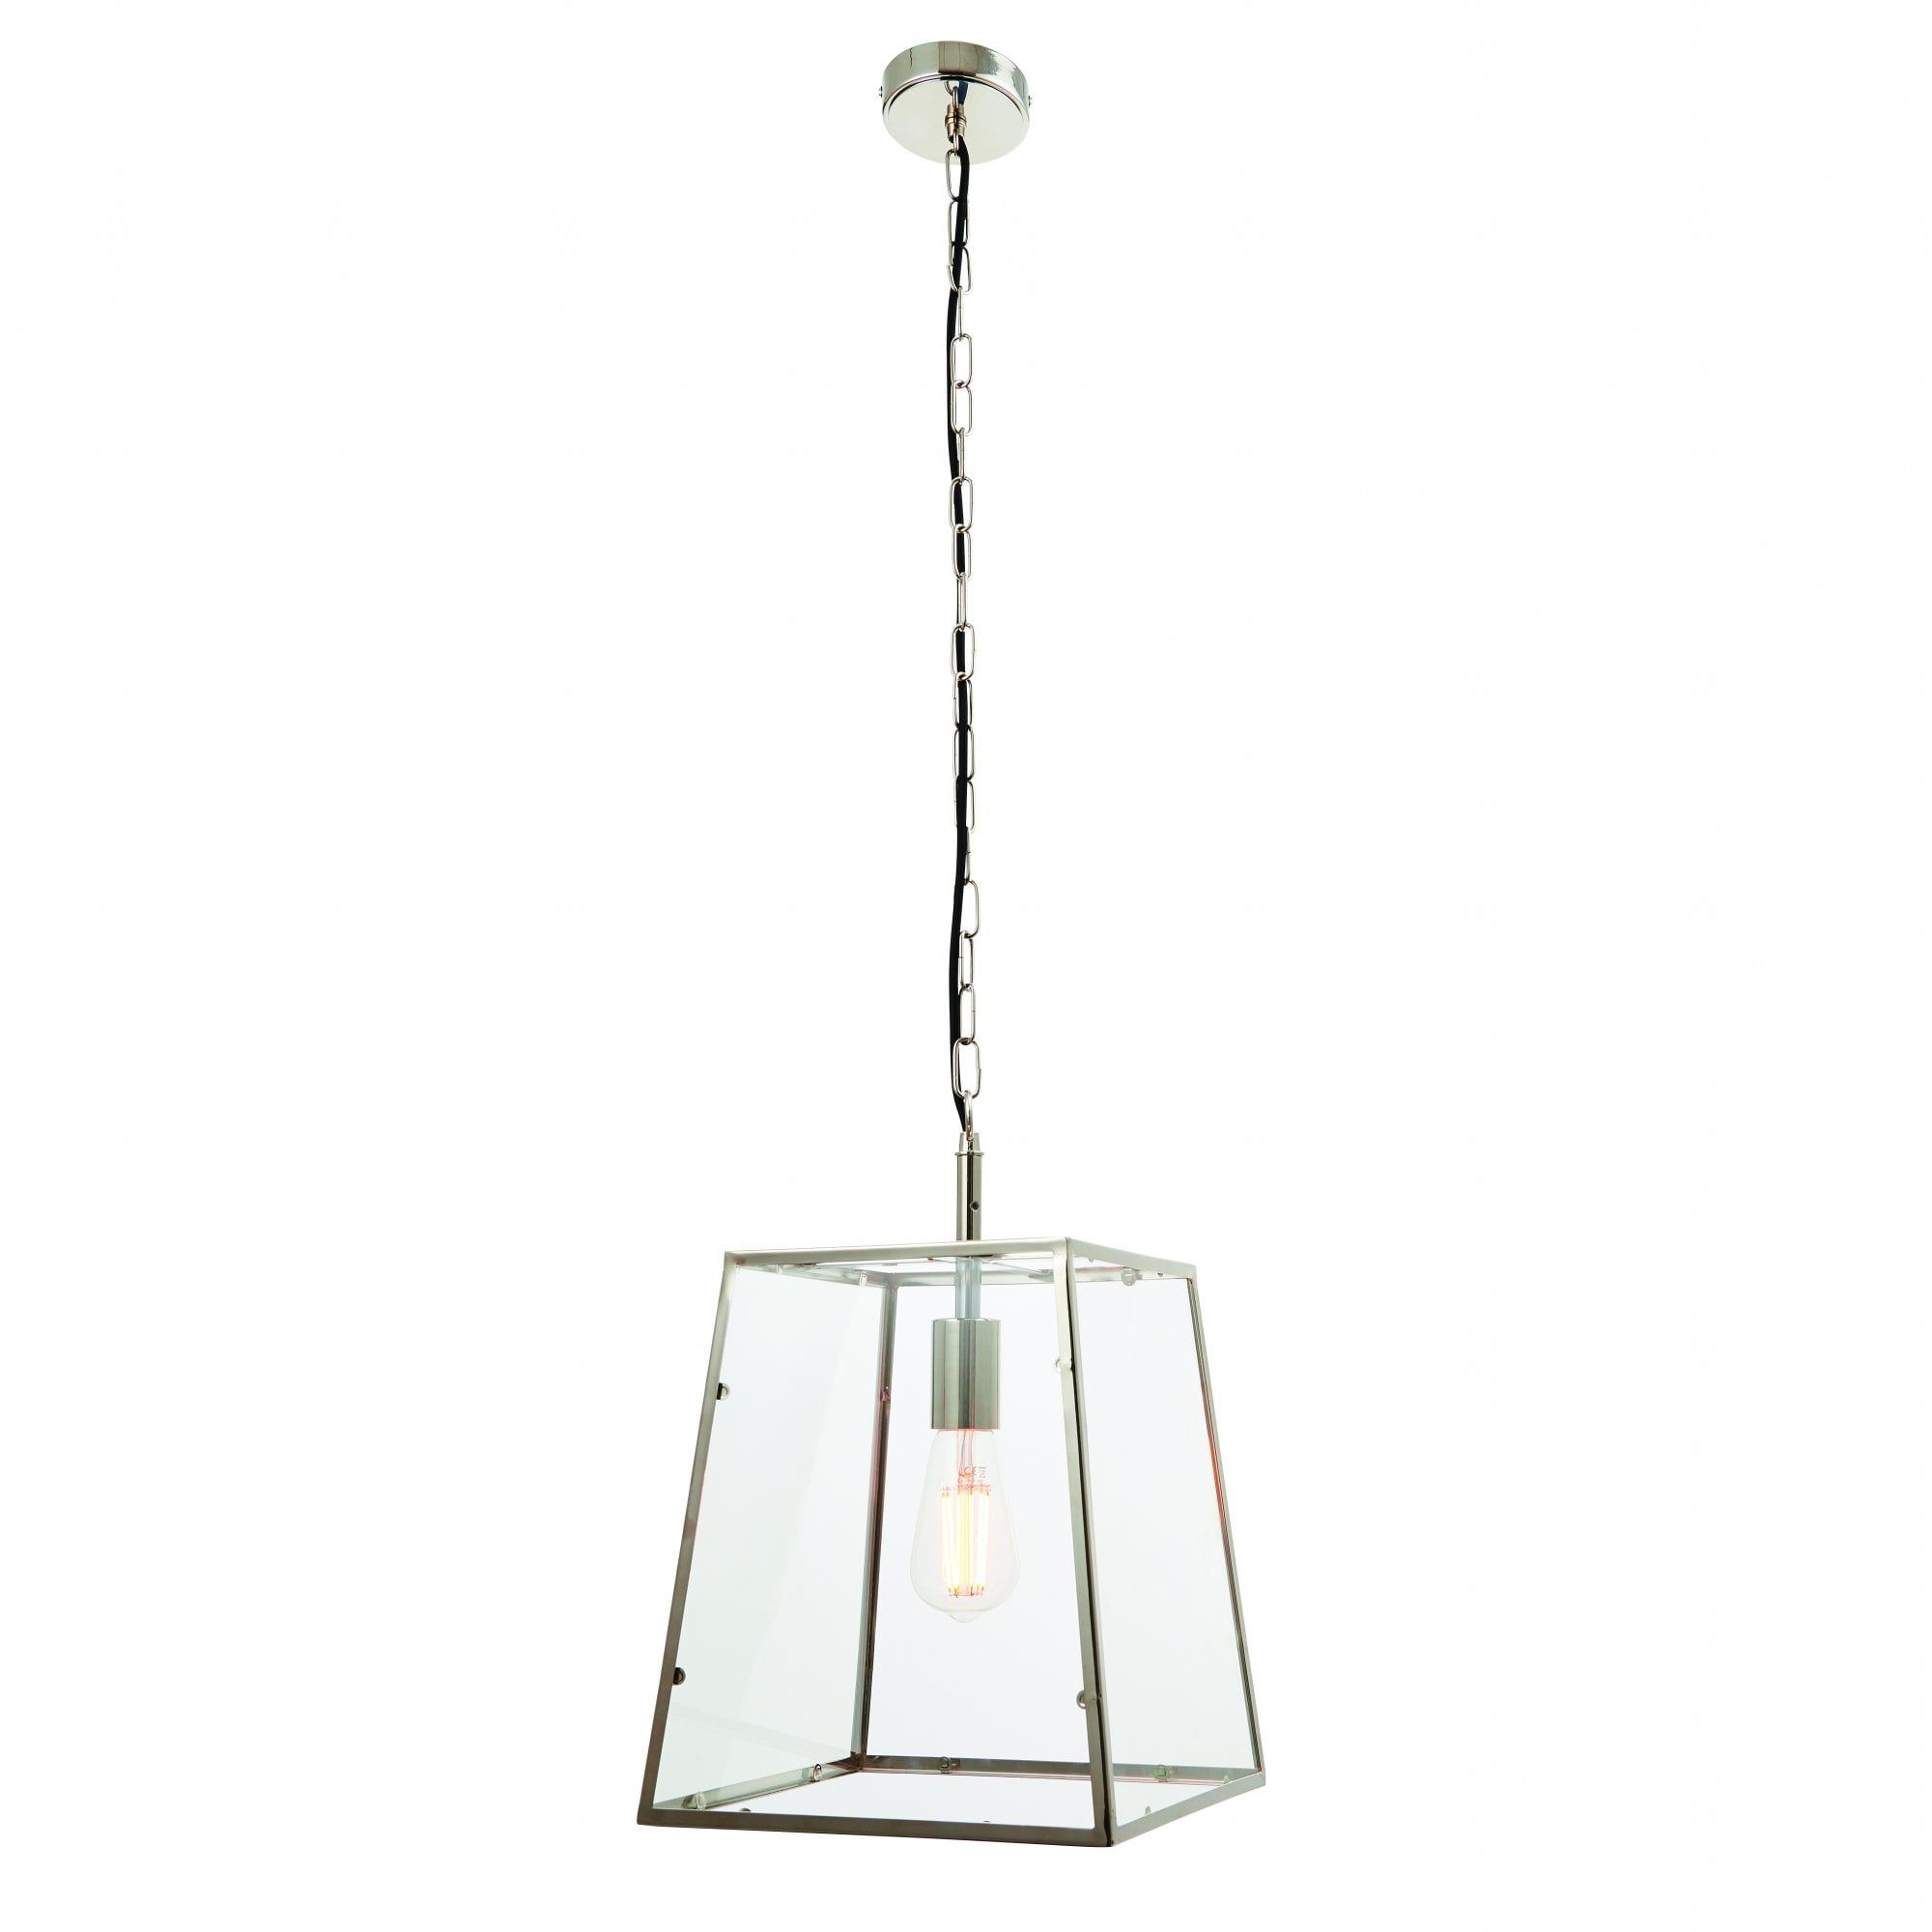 Lantern Chandeliers With Clear Glass With Preferred Ceiling Lantern In Polished Nickel With Clear Glass (View 5 of 15)